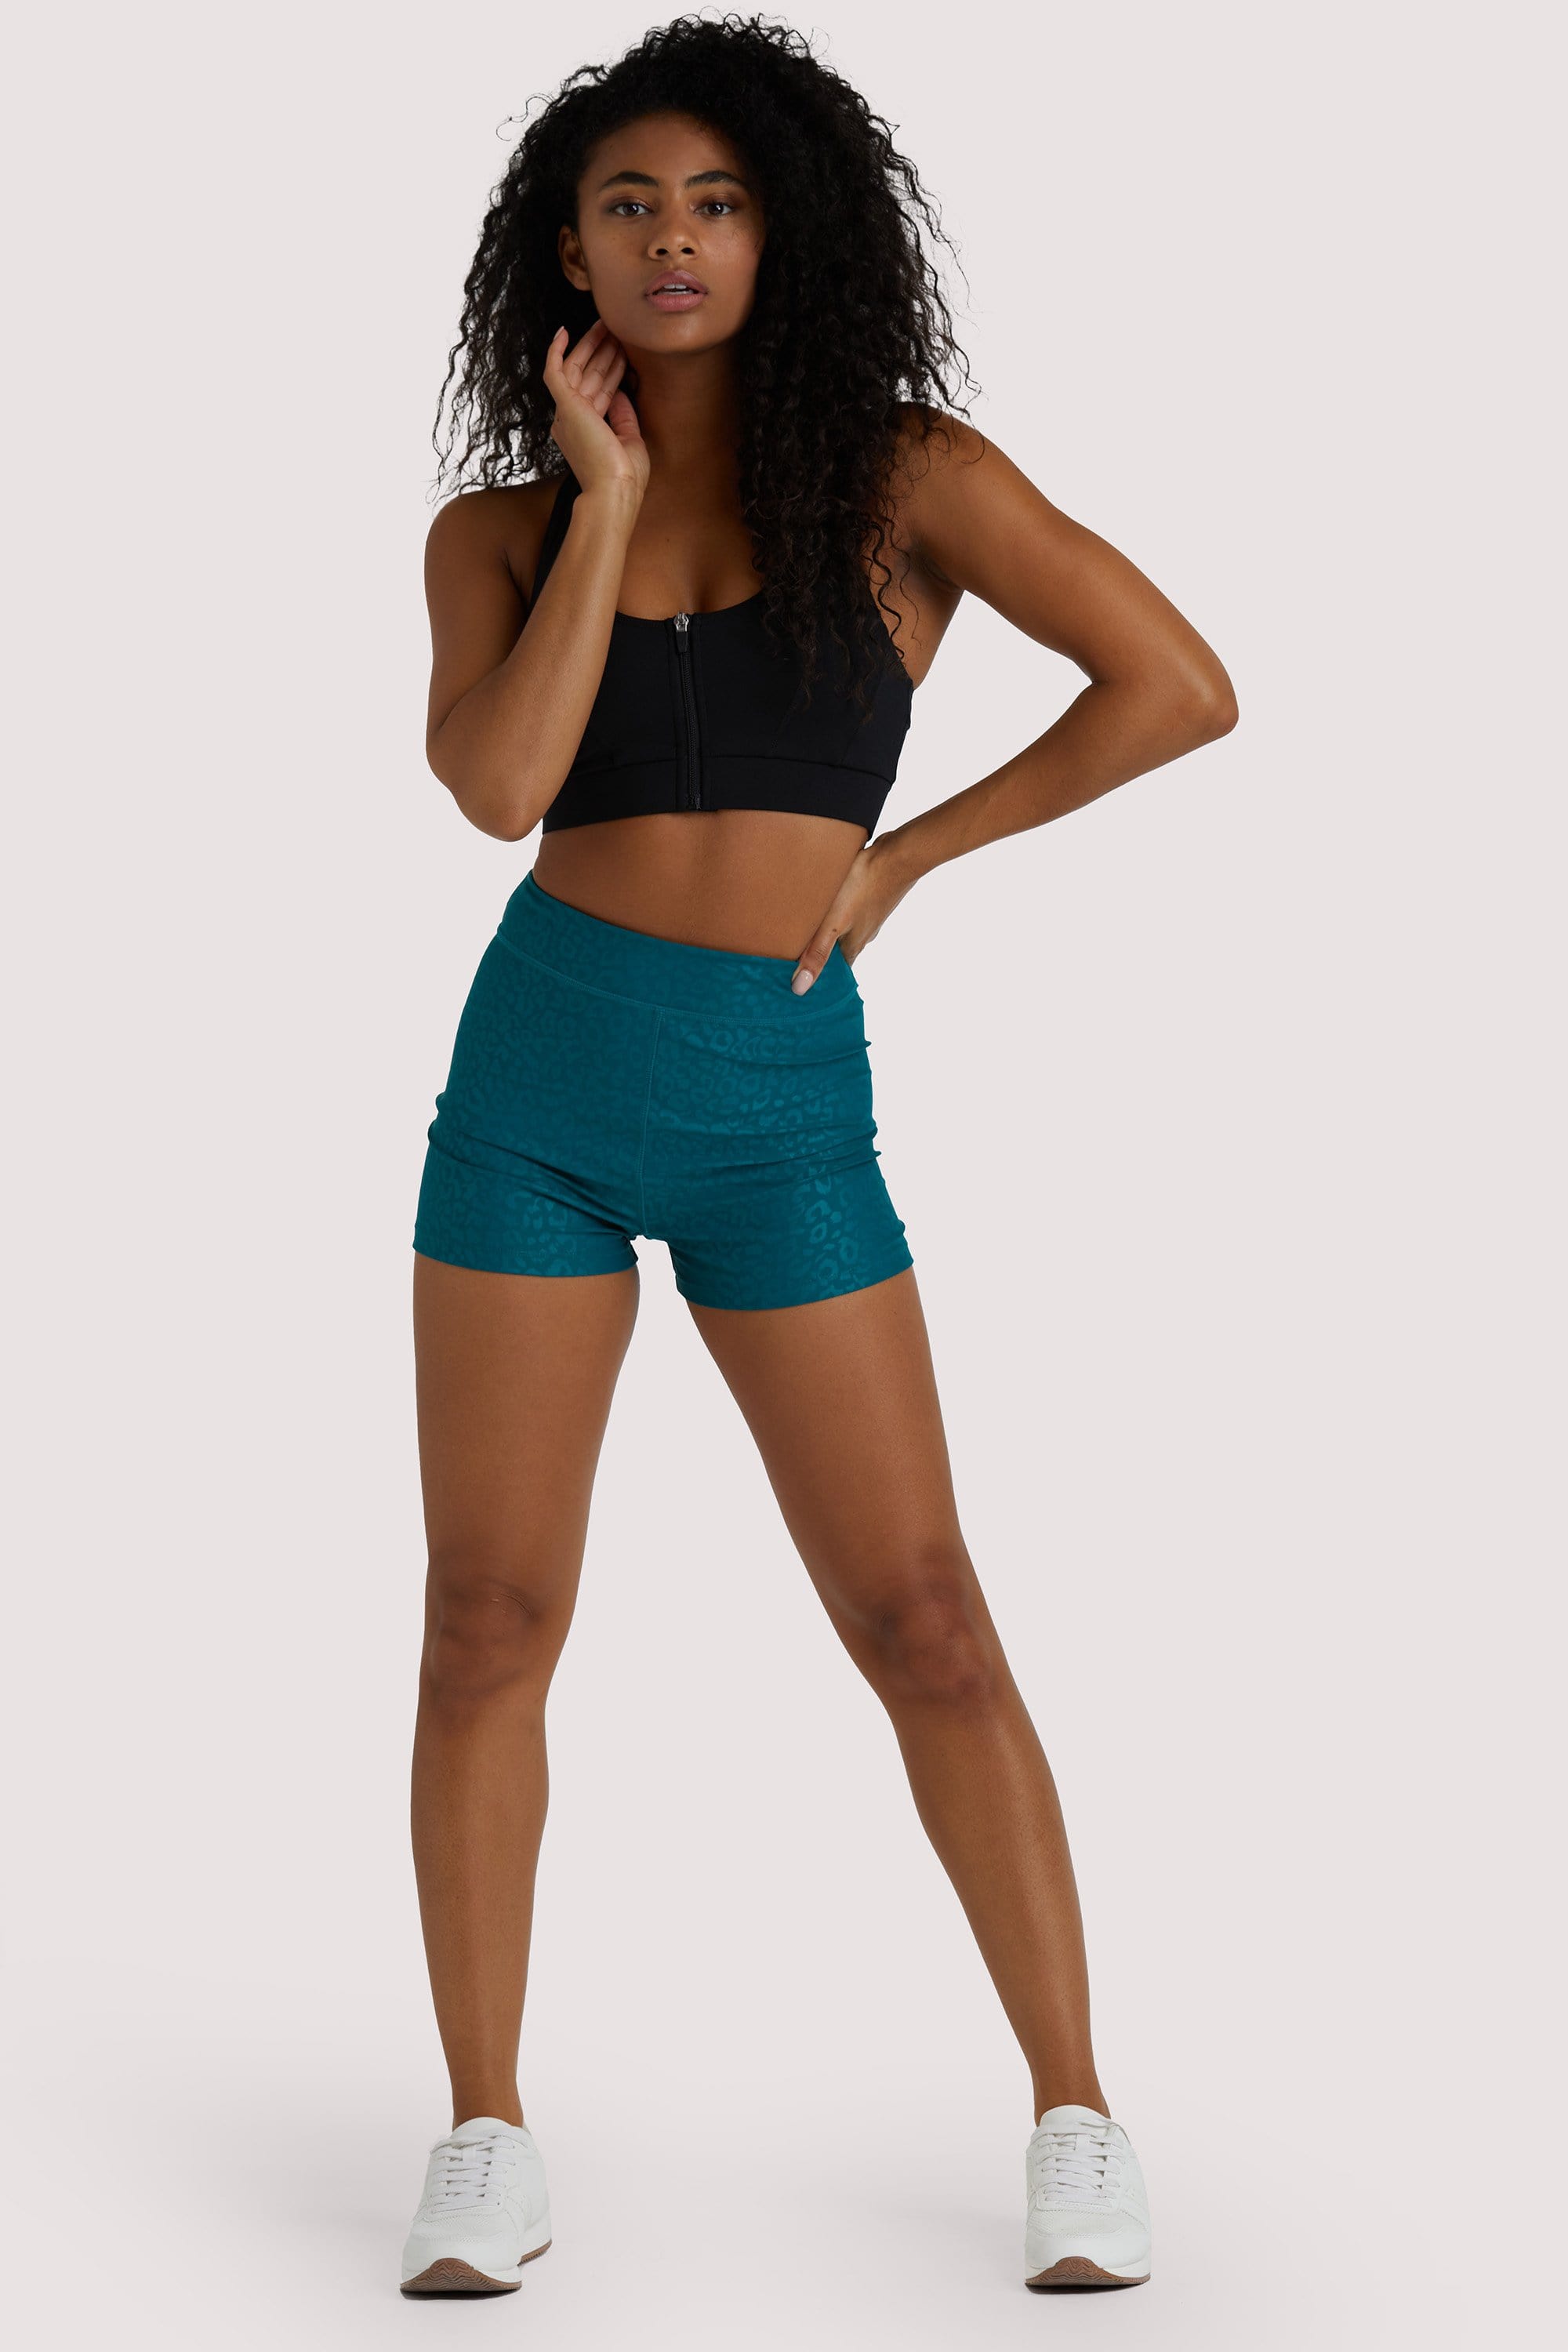 Teal Wet Look Shorts